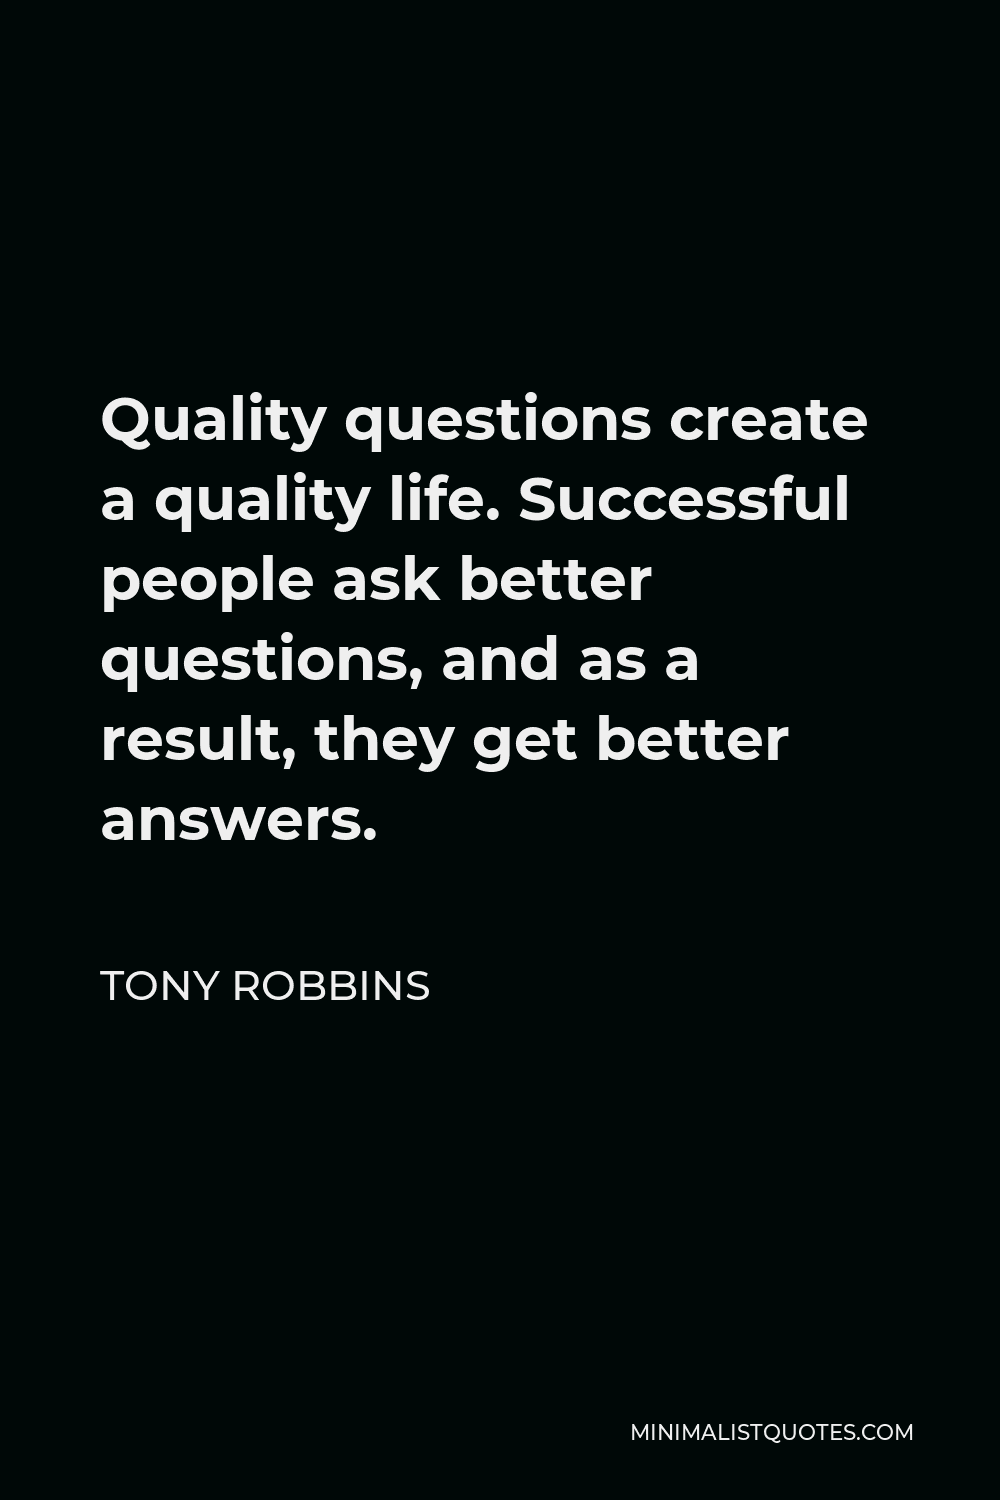 Tony Robbins Quote - Quality questions create a quality life. Successful people ask better questions, and as a result, they get better answers.